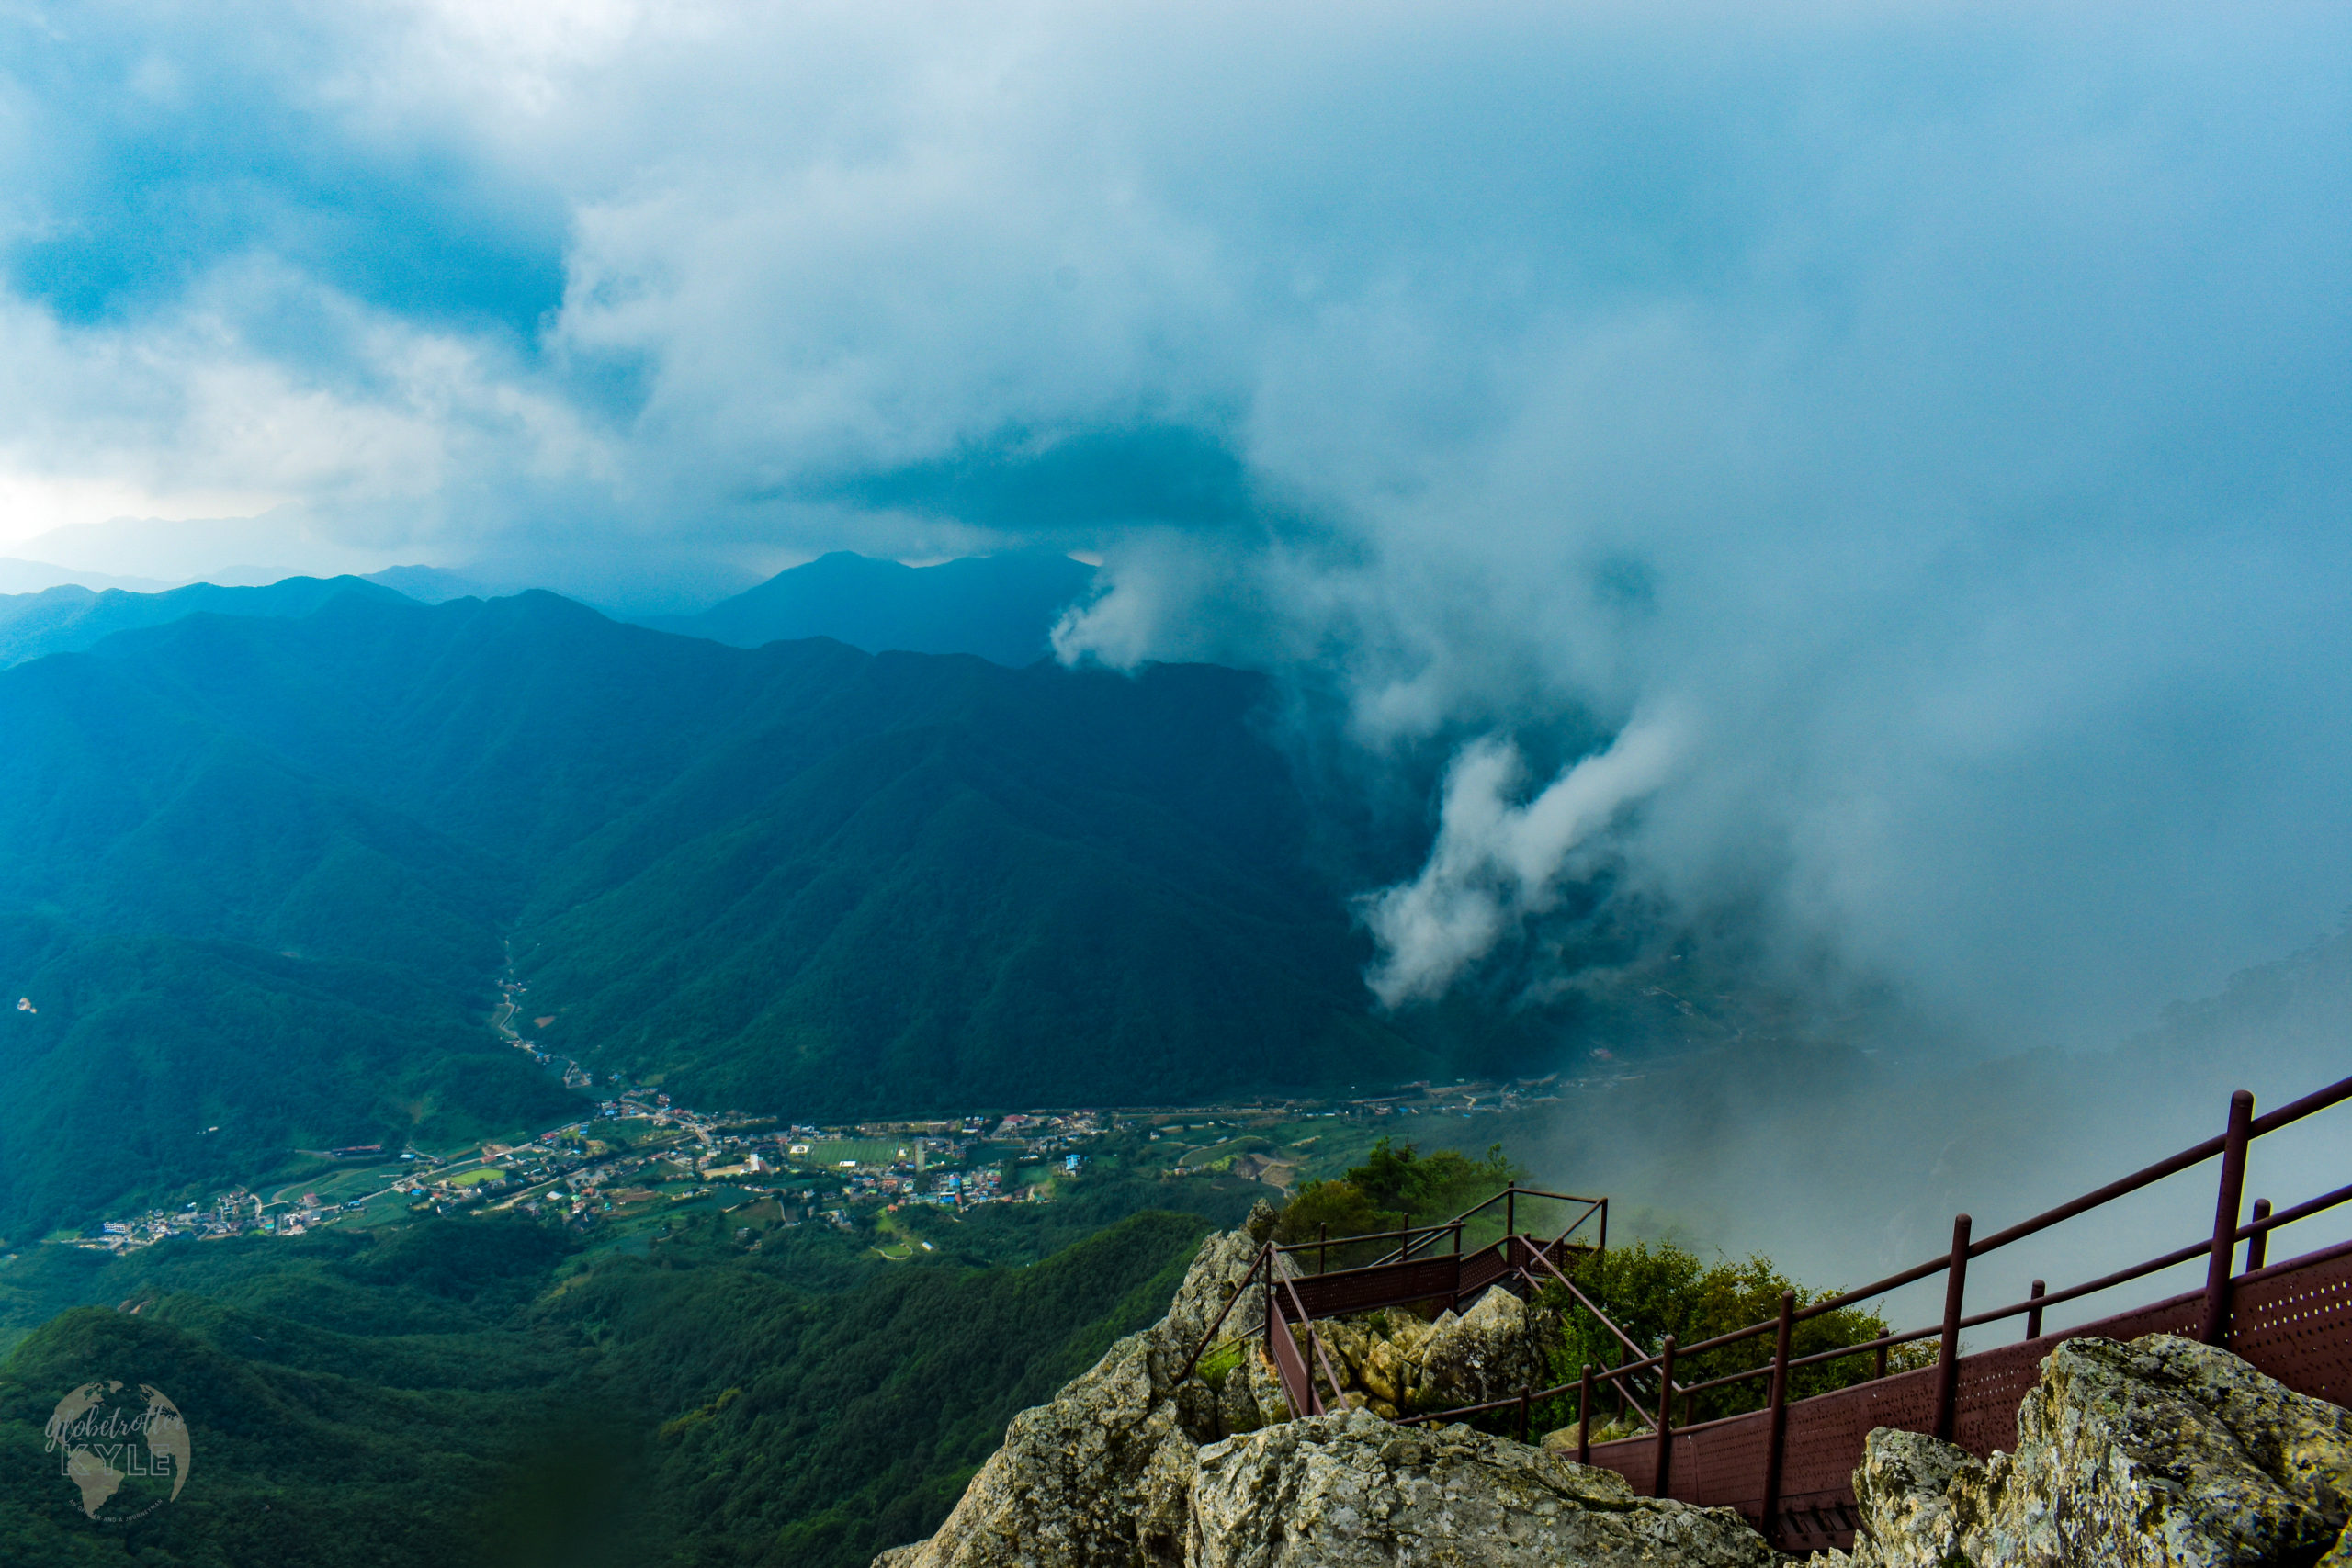 standing atop a mountain in south korea, clouds swarm in from the right as they begin to swallow the viewer's 10 mile visibility range with a mountain range in the distance